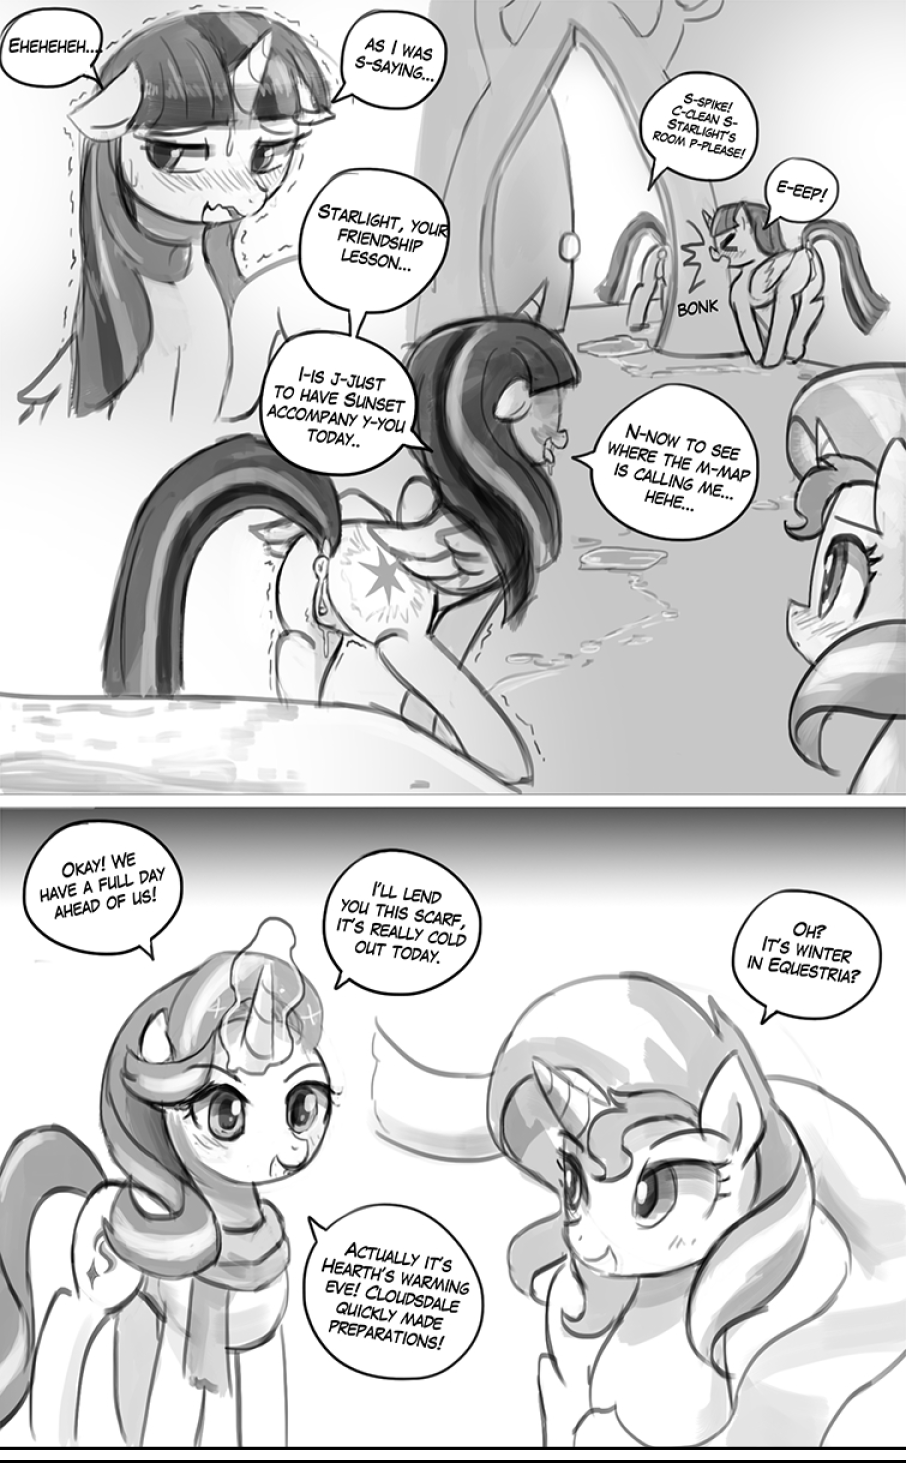 Homesick Part 2: Hearth's Warming Eve porn comic picture 7